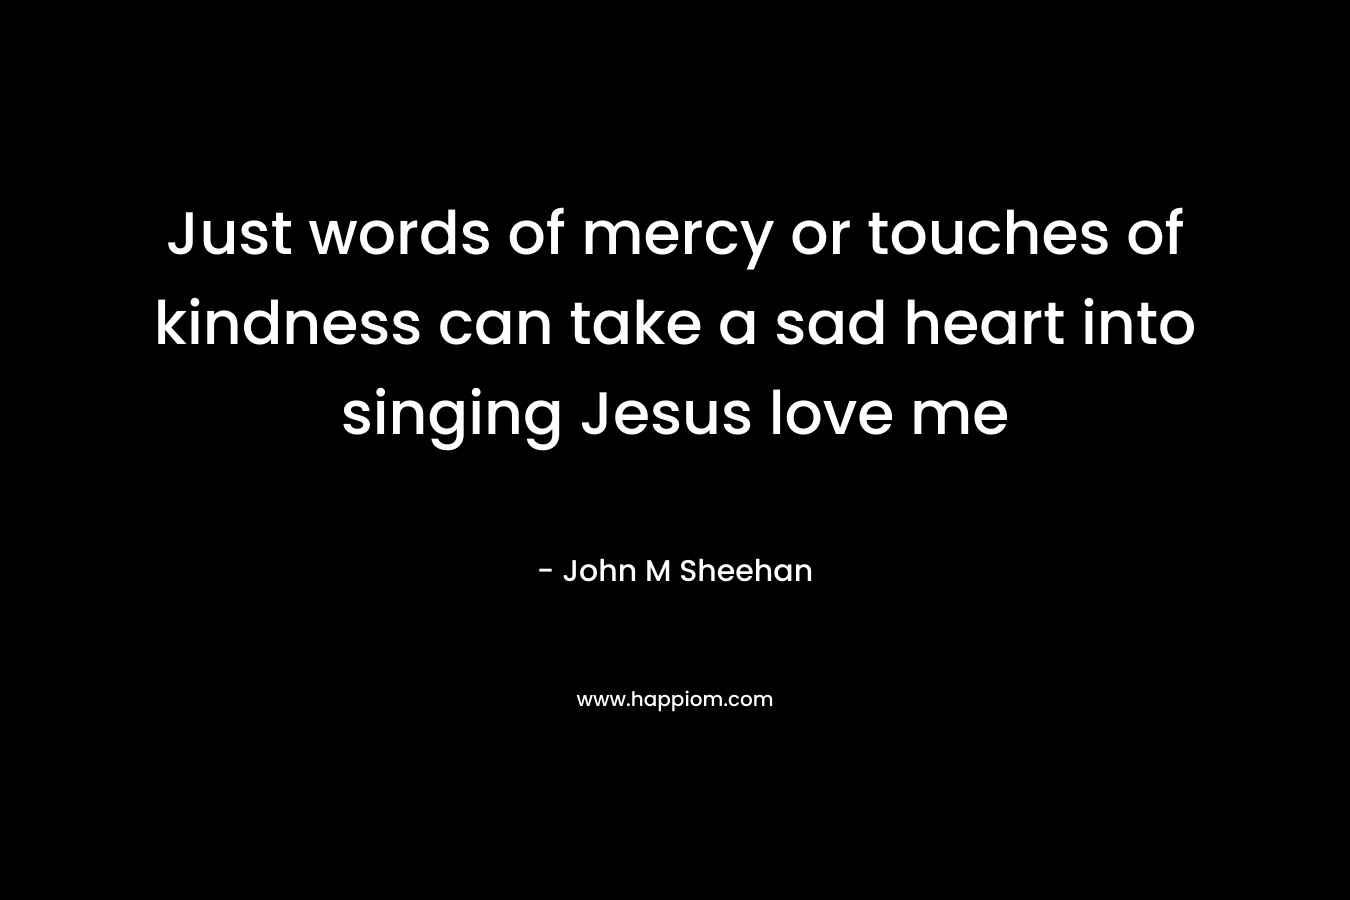 Just words of mercy or touches of kindness can take a sad heart into singing Jesus love me – John M Sheehan